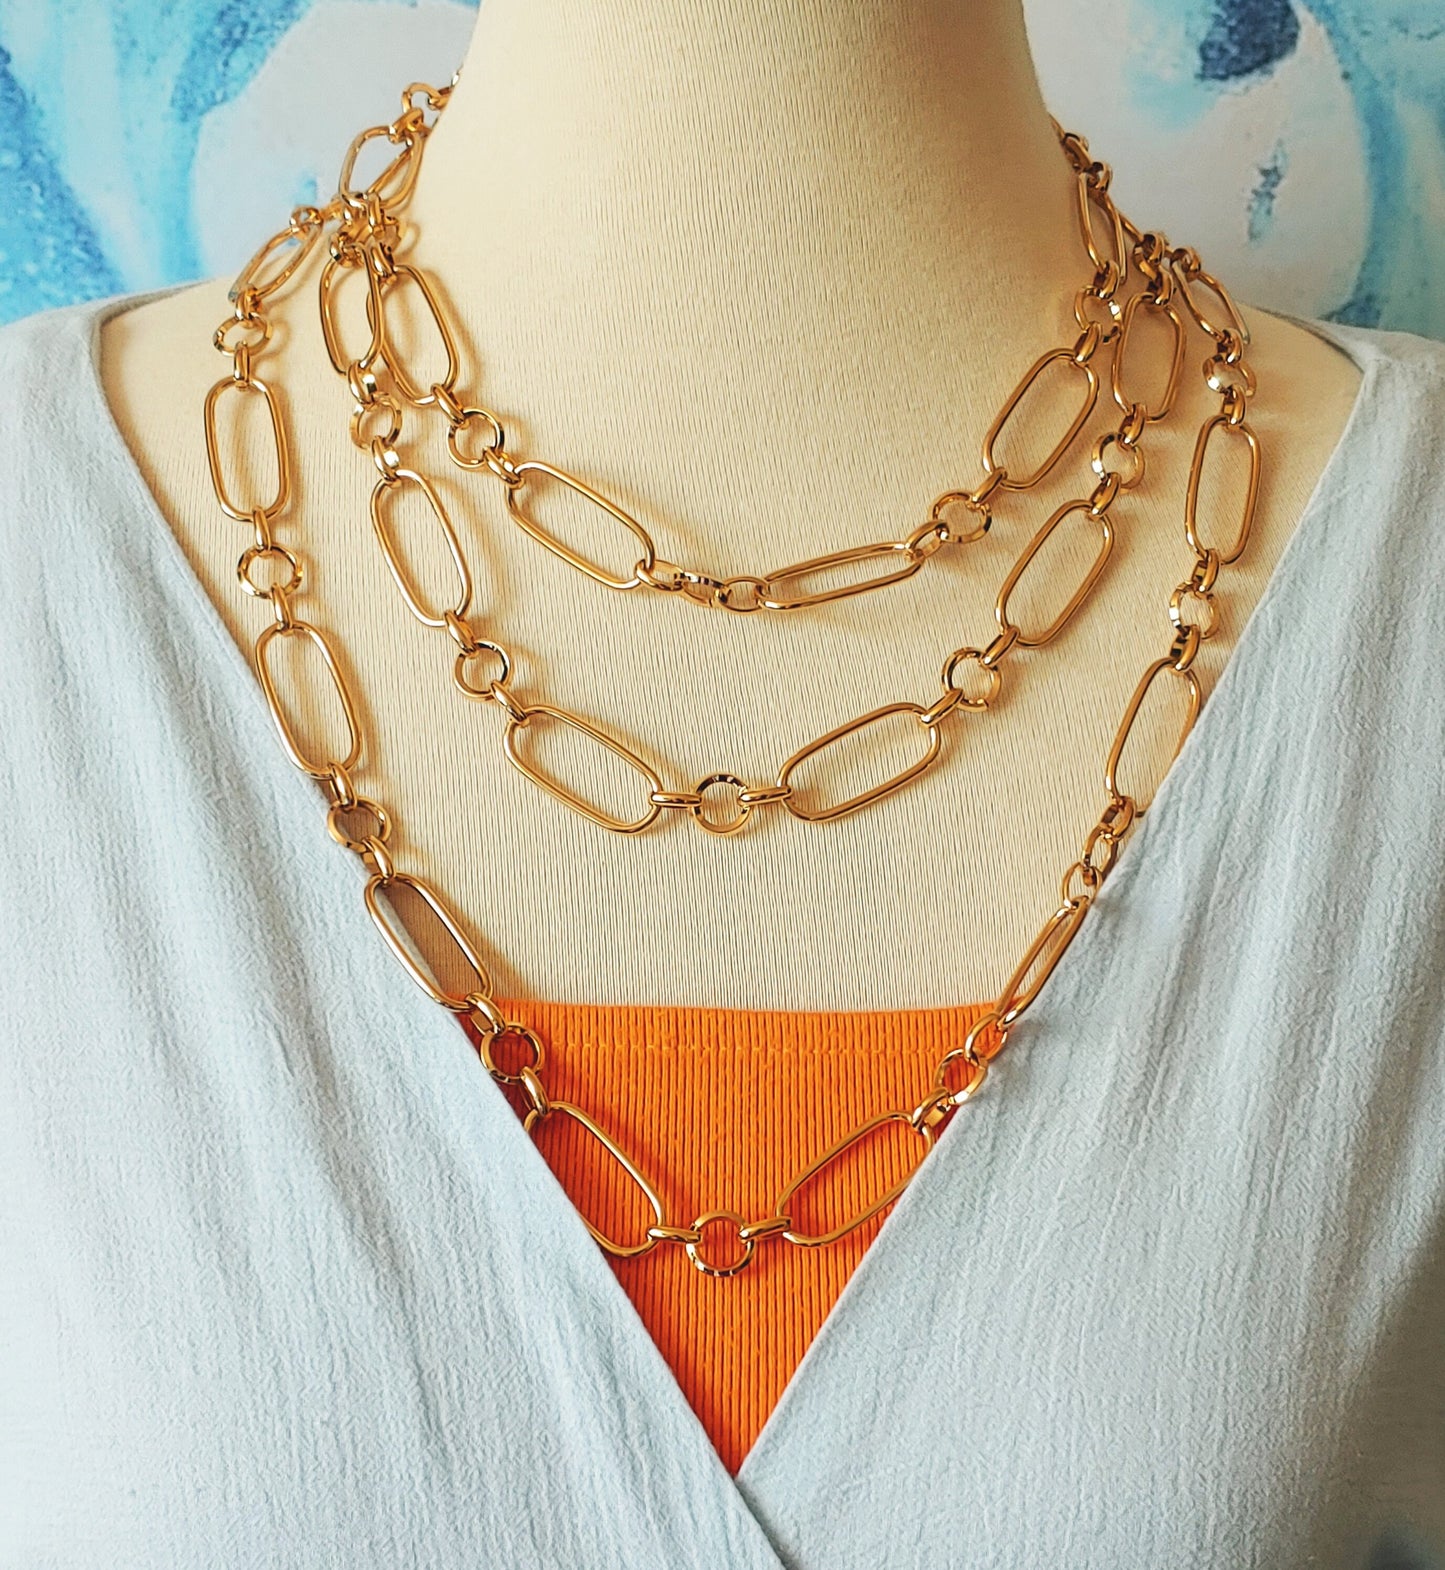 Lexington statement chain necklace in gold or rhodium plate